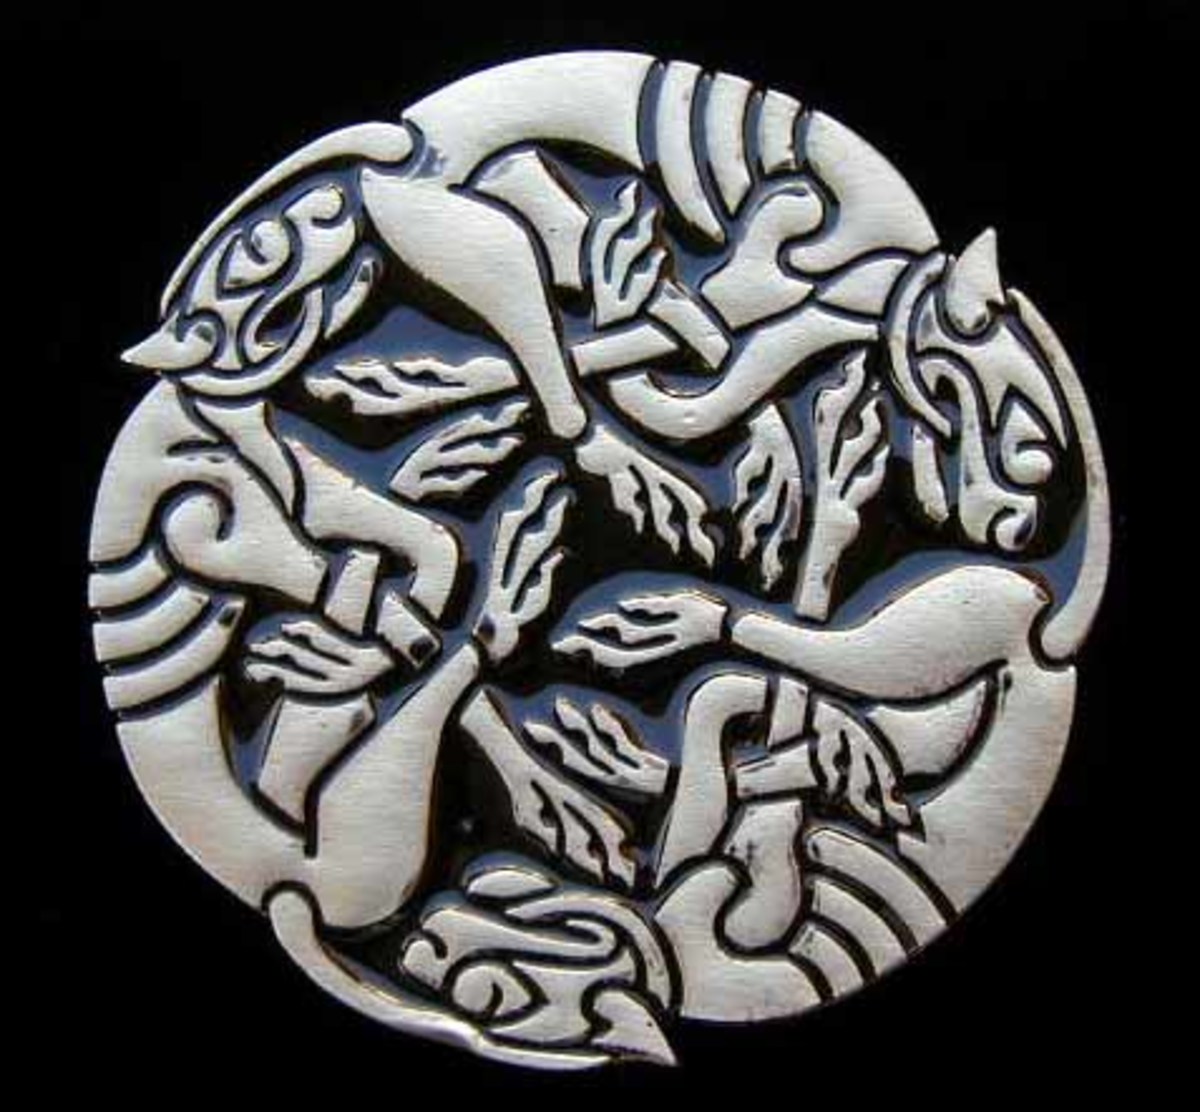 Tail-chaser carving - see the legend of Ioruaidhe or Ruaidhri